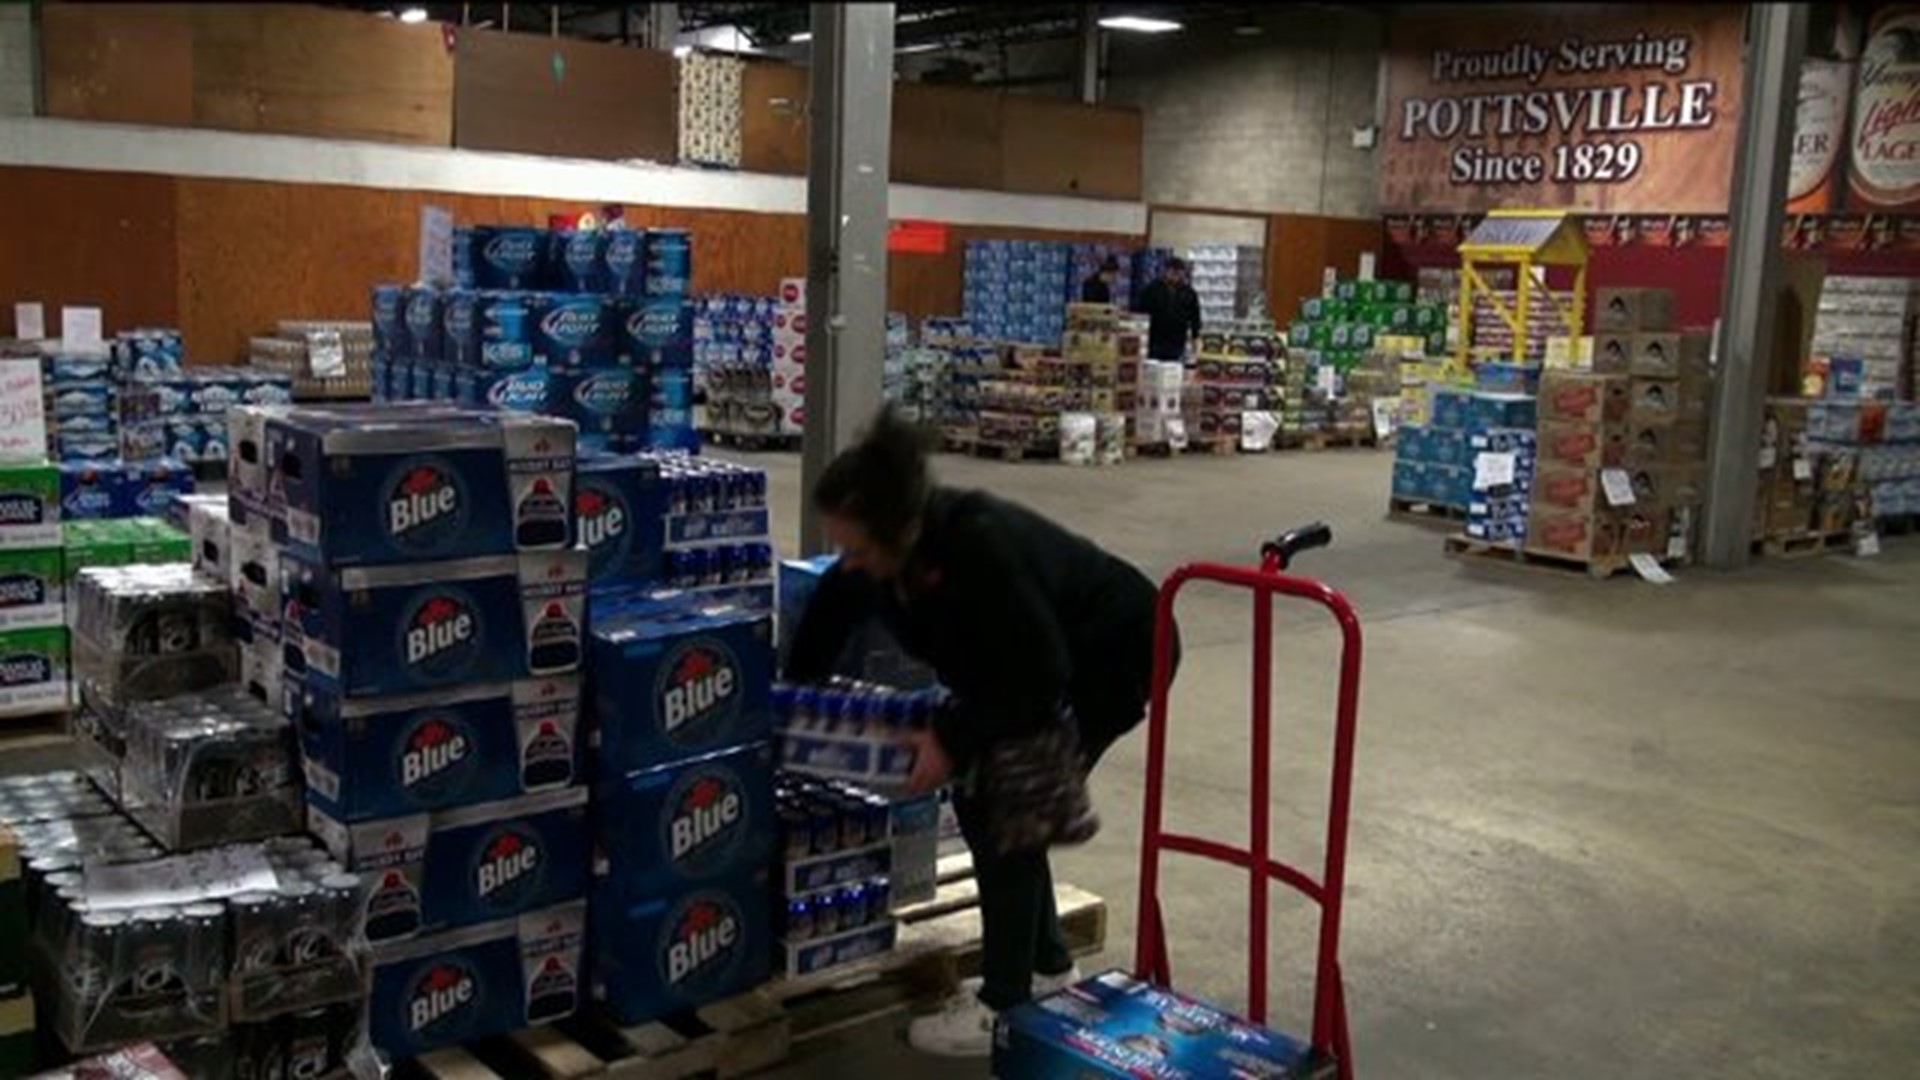 Pottsville Beer Distributor Closes After 51 Years